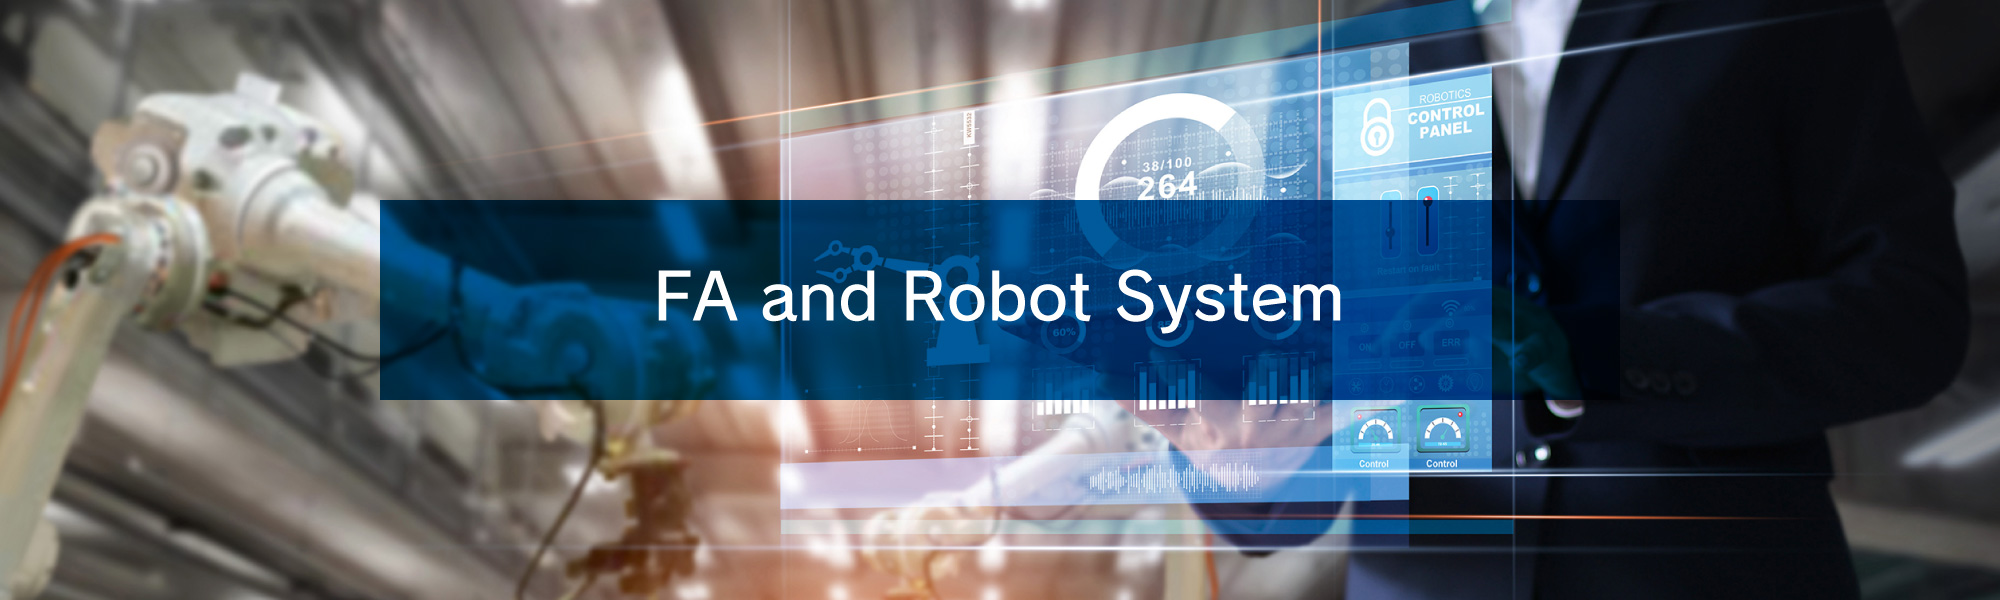 FA and Robot System